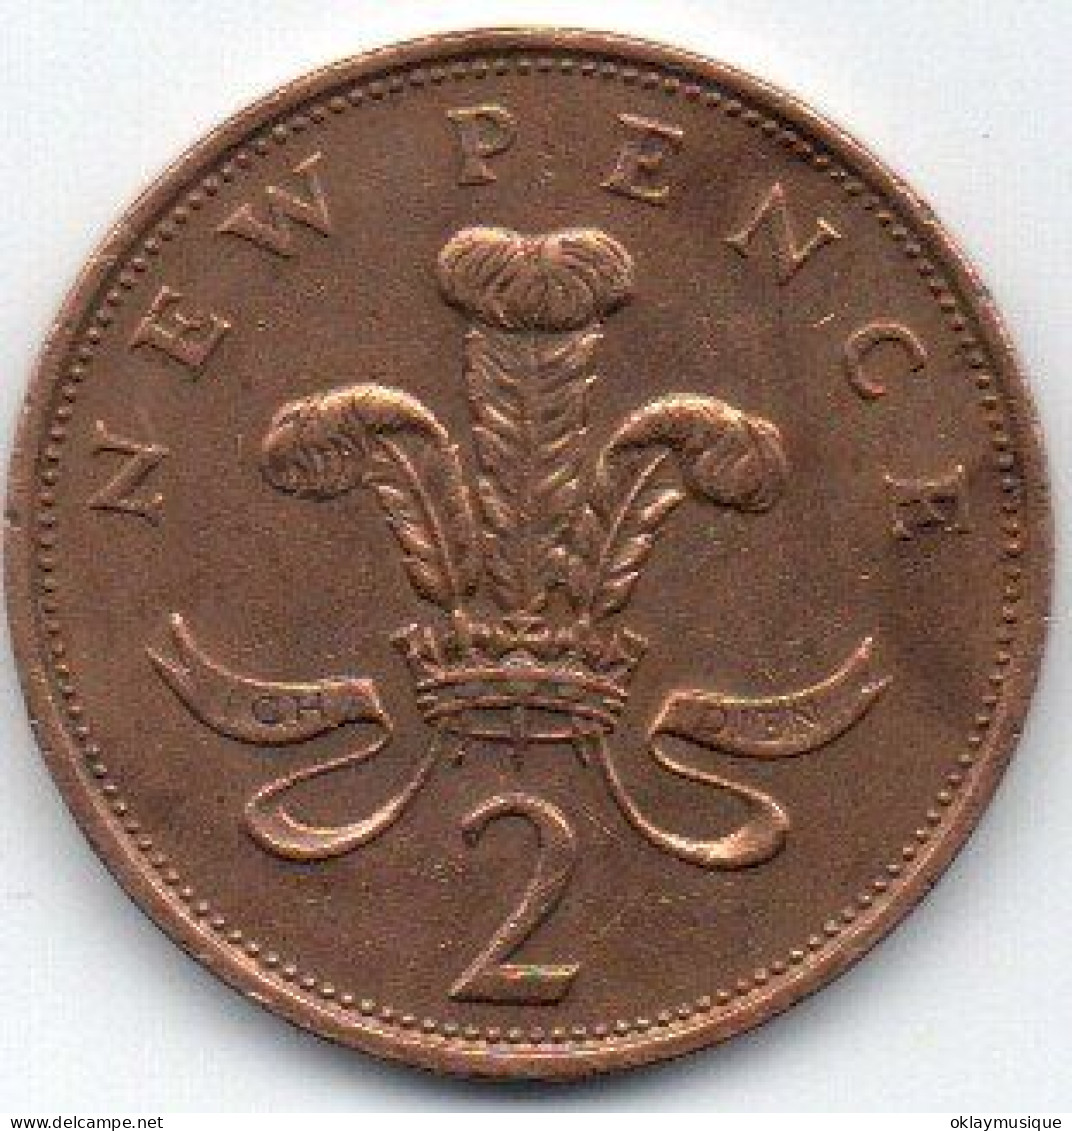 2 New Pence  1971 - 2 Pence & 2 New Pence